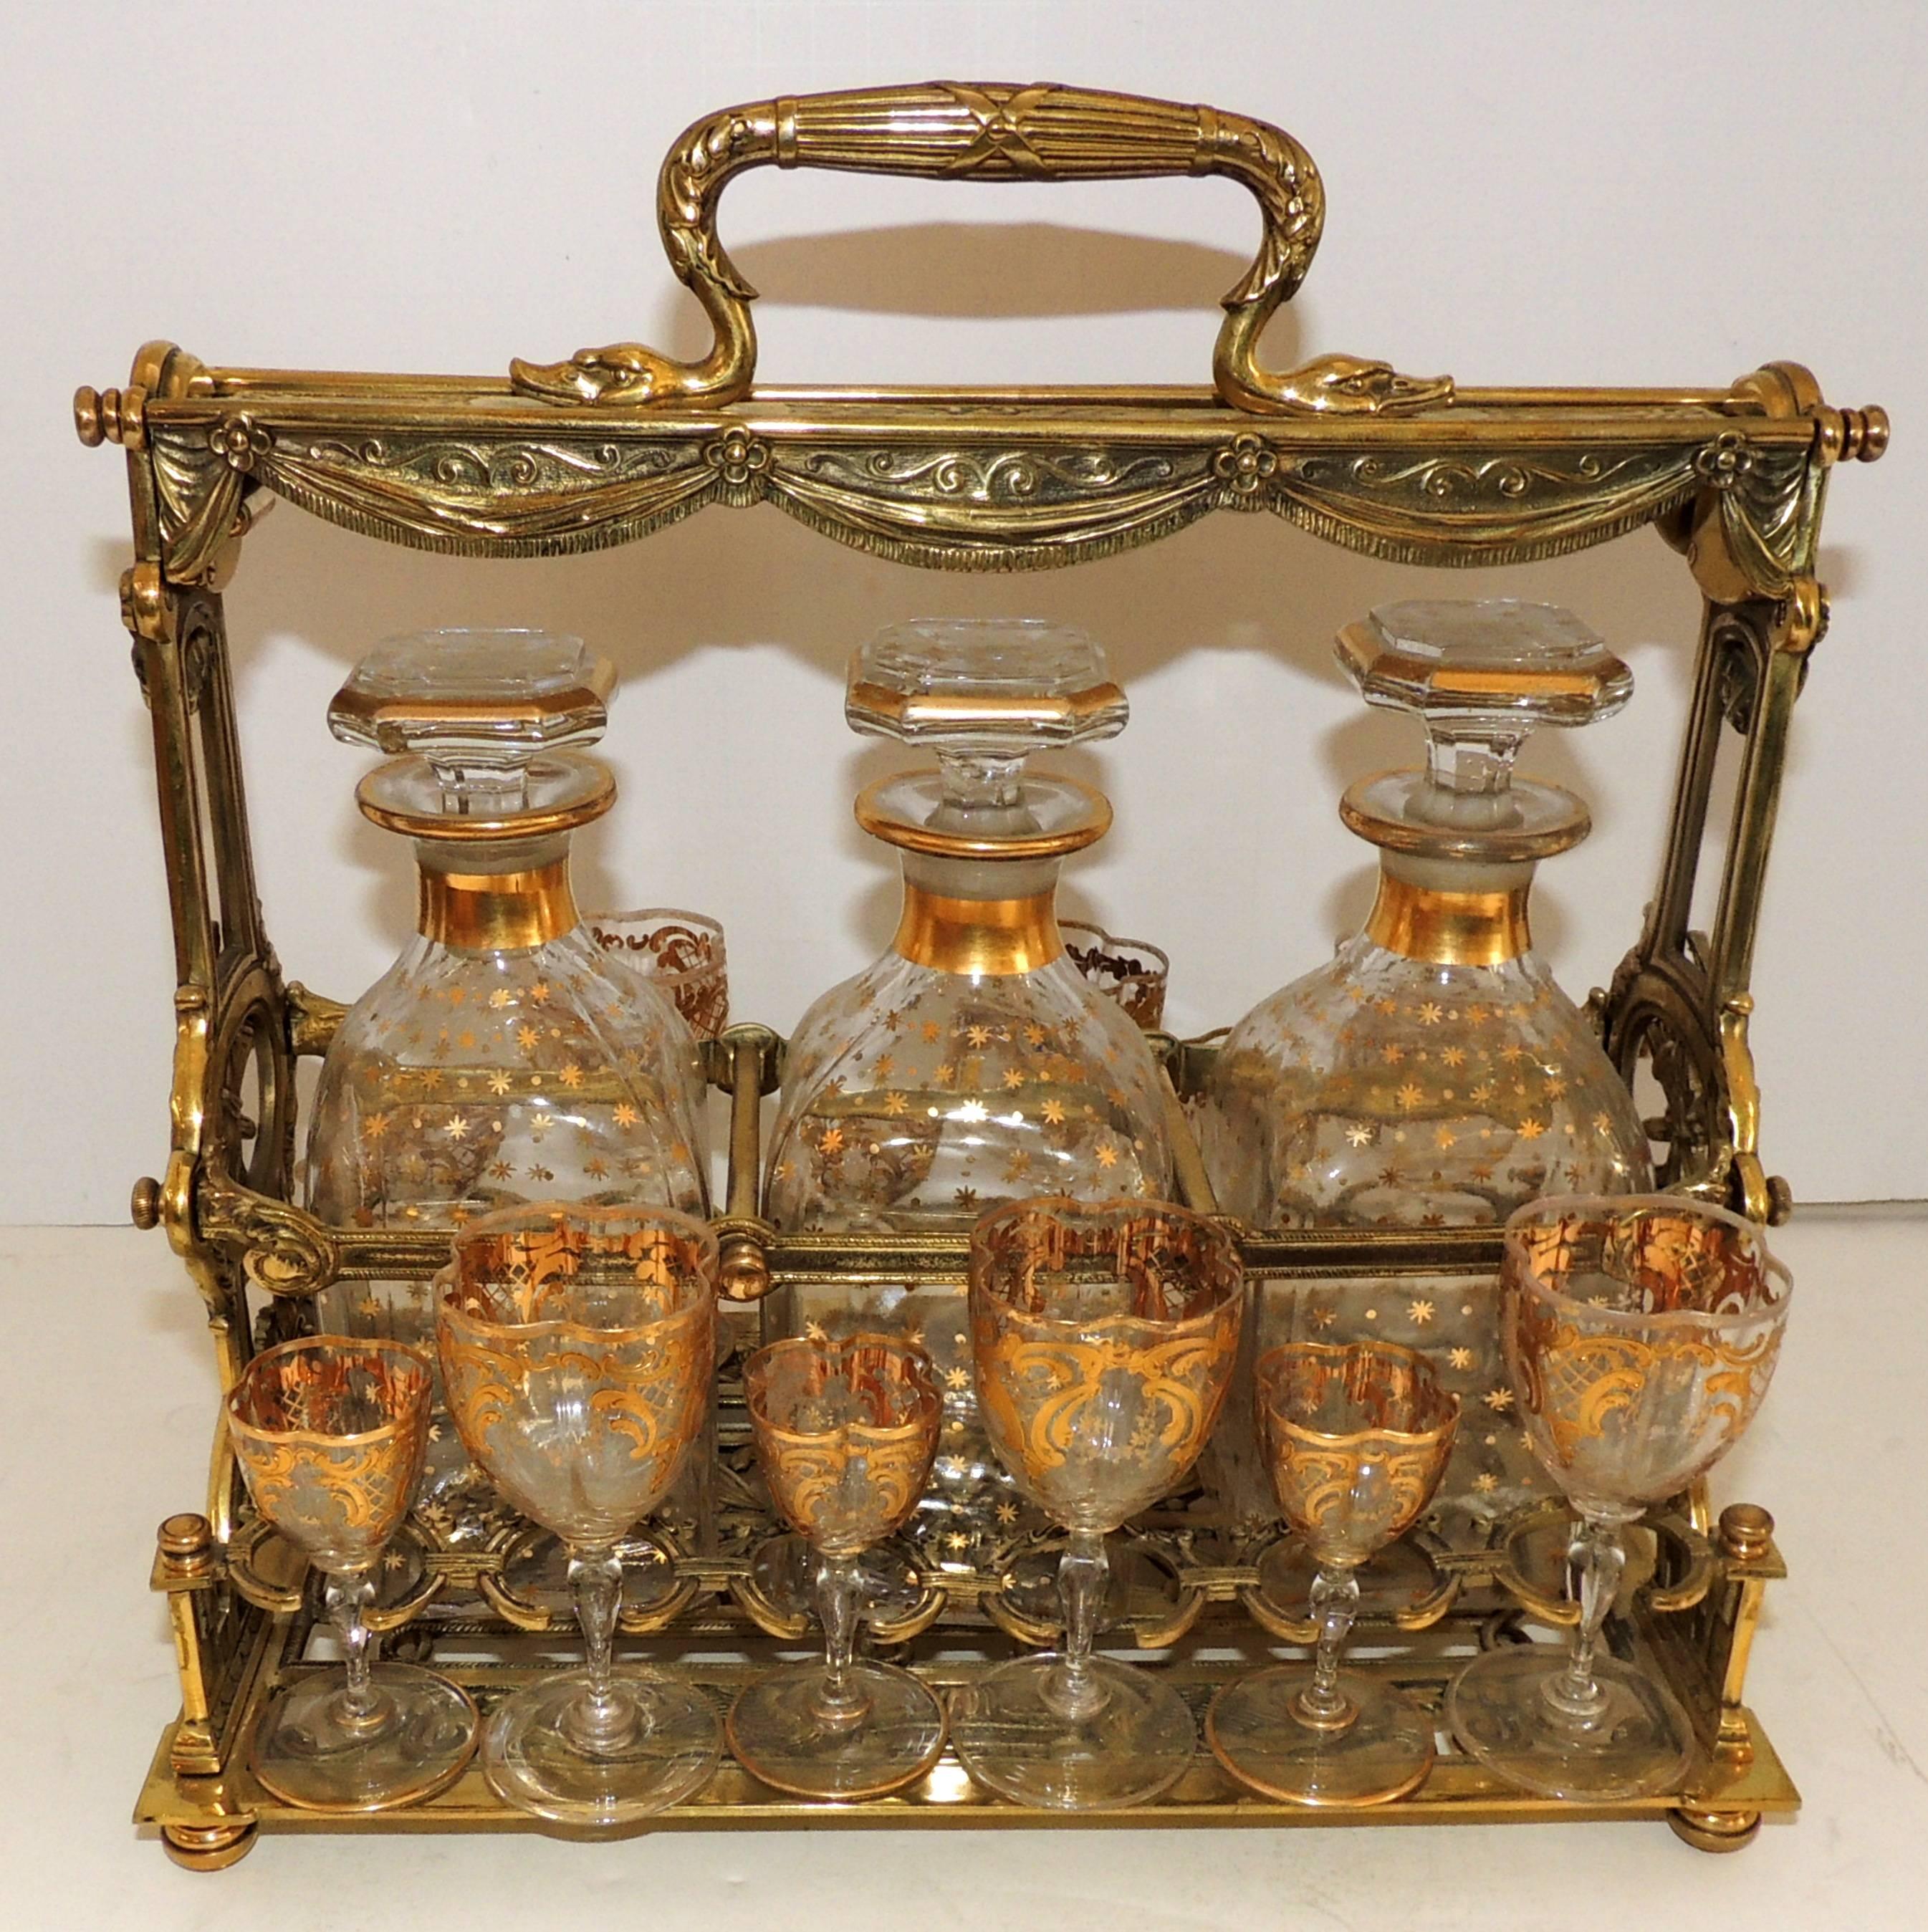 A wonderful French bronze and crystal tantalus, liquor set consisting of three decanters 8